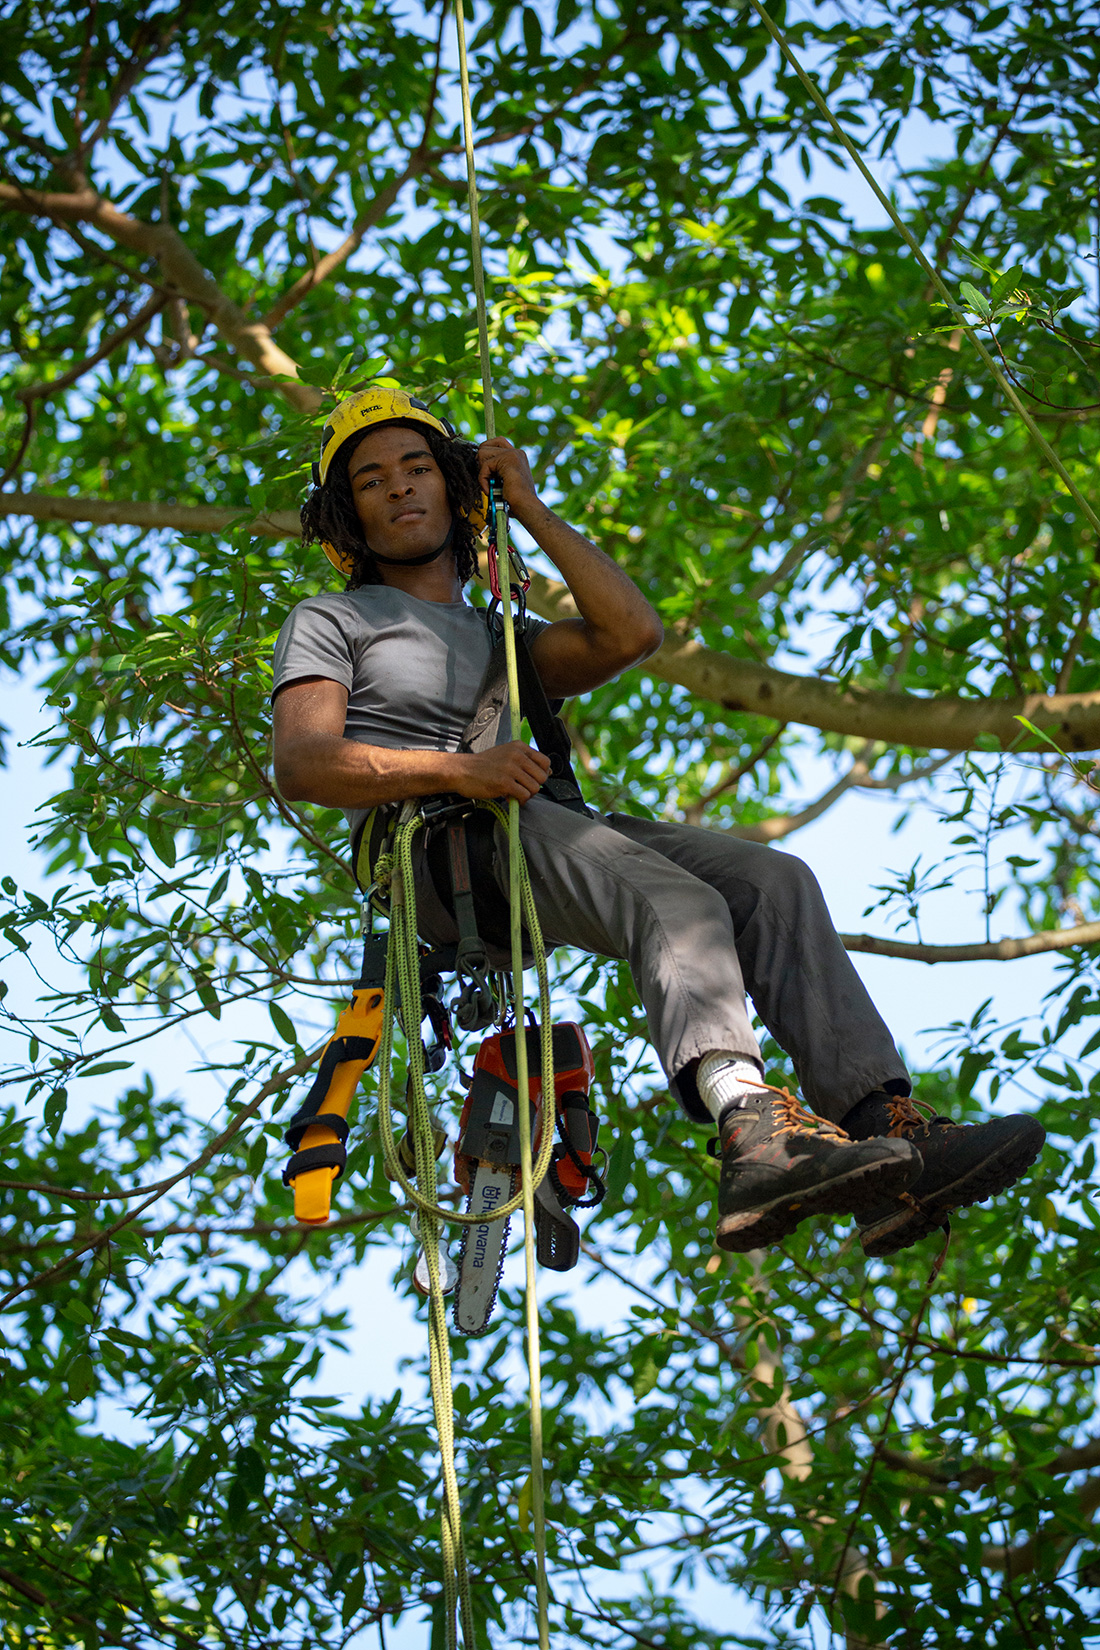 Andressohn works for True Tree Service in Miami, where he is a production arborist, trained to safely ascend and descend trees in order to care for them. Our cities need many more like him. Urban forestry is expected to see a 10% increase in job openings for entry-level positions by 2028.